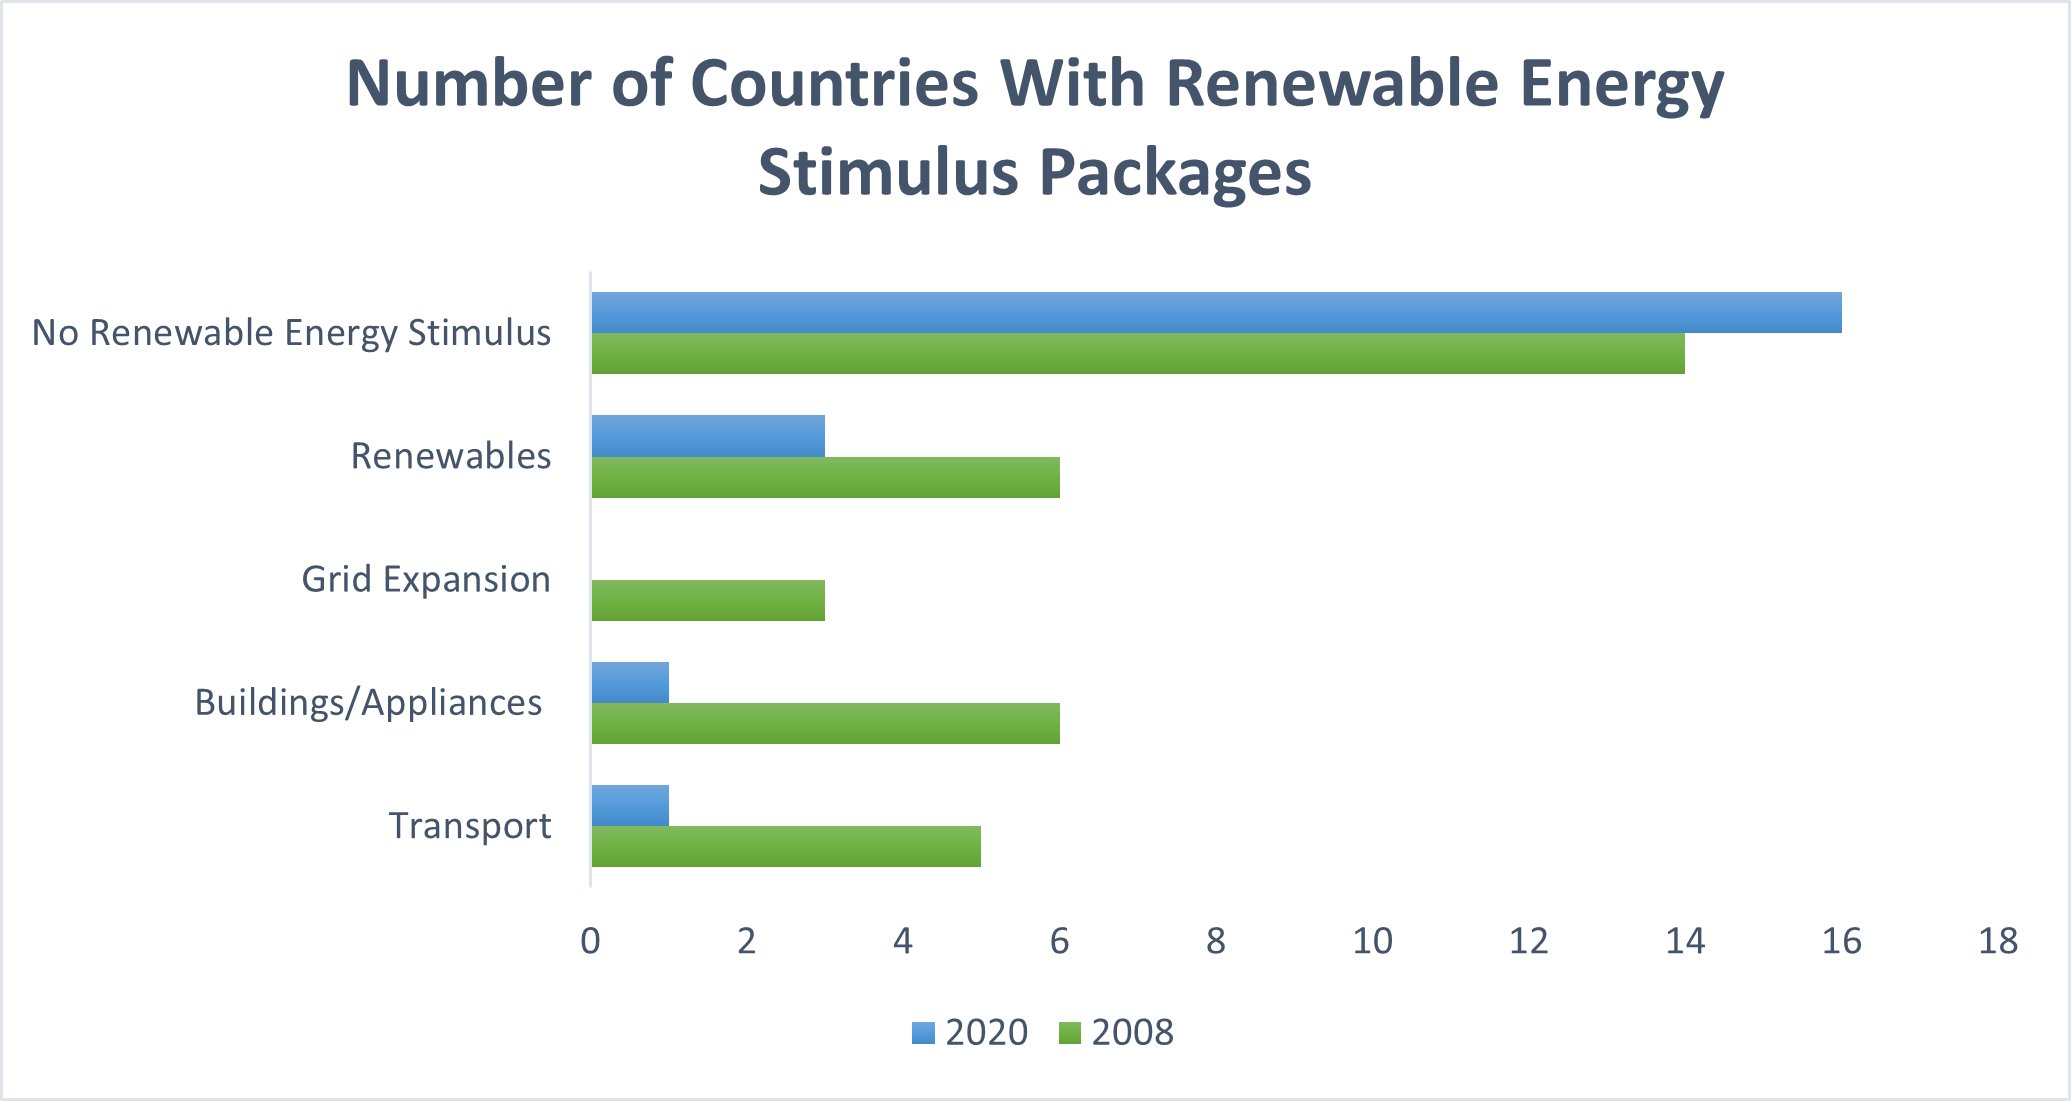 Number of Countries With Renewable Energy Stimulus Packages